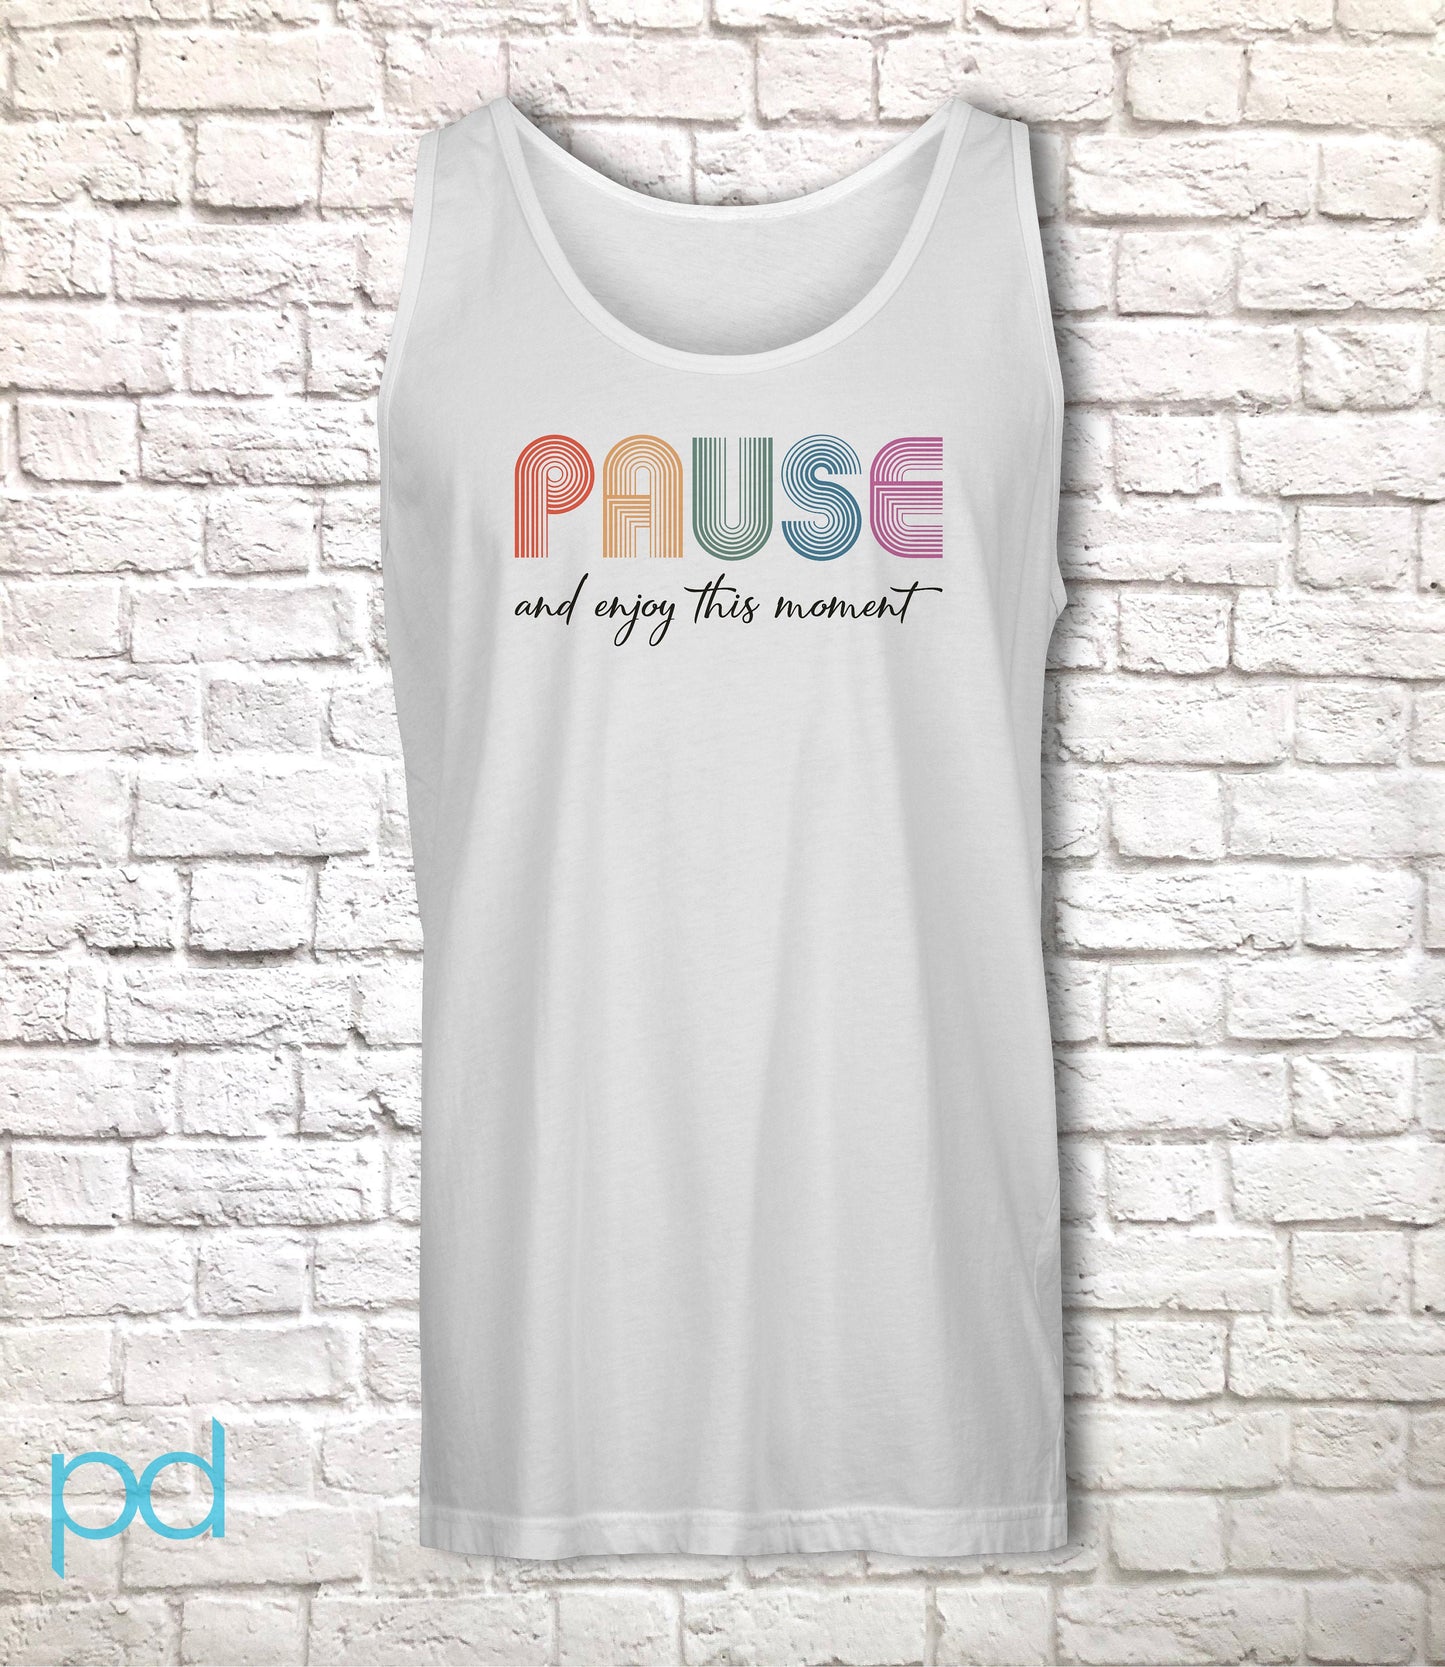 PAUSE Tank Top, Calm Reflection Birthday Gift Vest in Retro Vintage 70s style, Chill Relax Unisex Tank Top For Men or Women